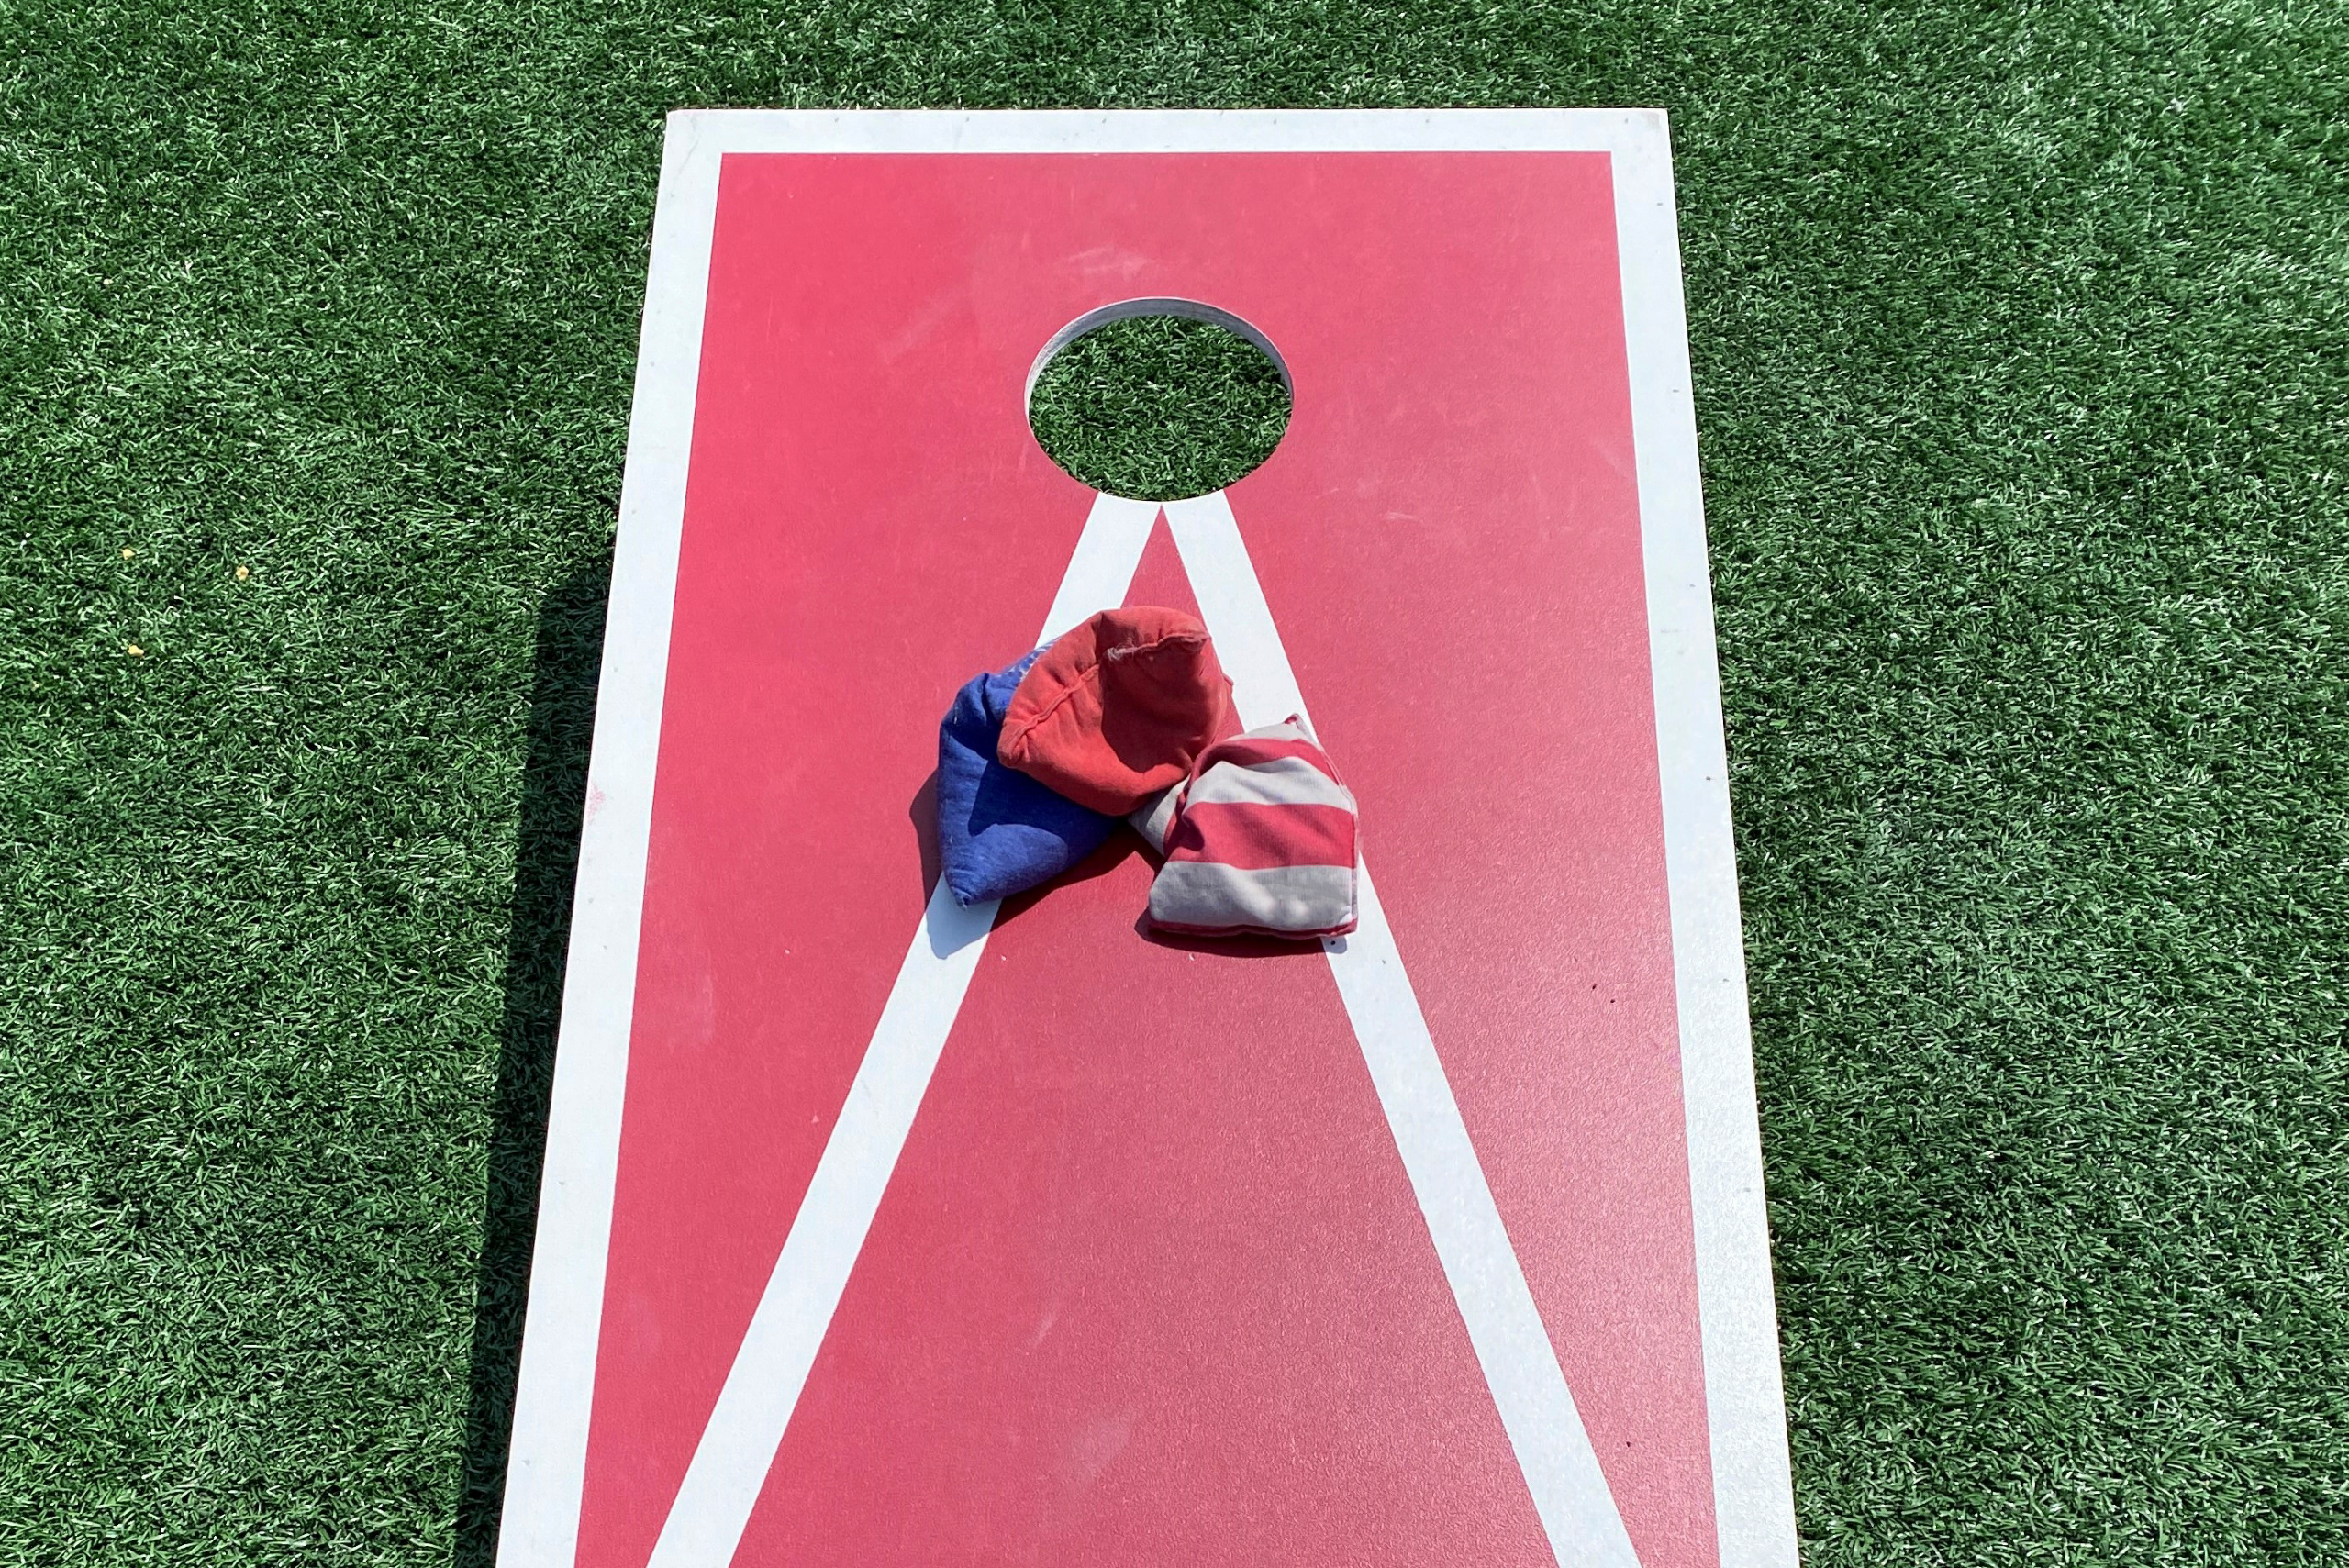 Red cornhole board with playing bags on top.